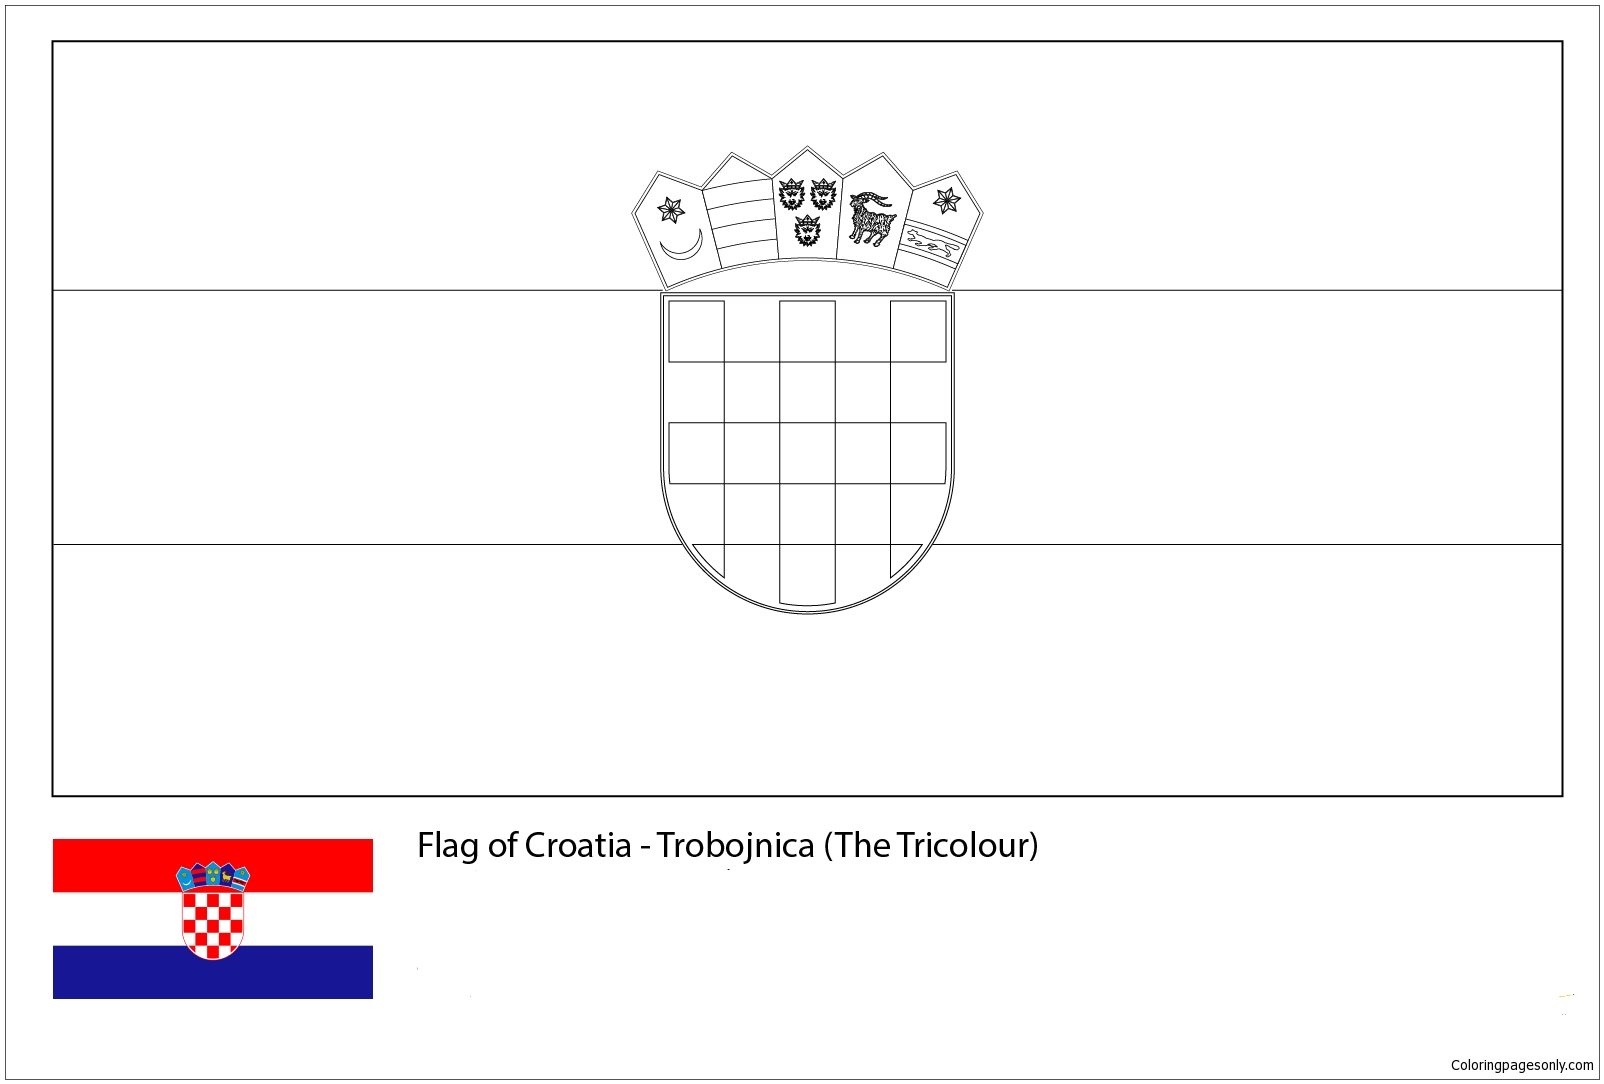 Download Flag of Croatia-World Cup 2018 Coloring Page - Free Coloring Pages Online